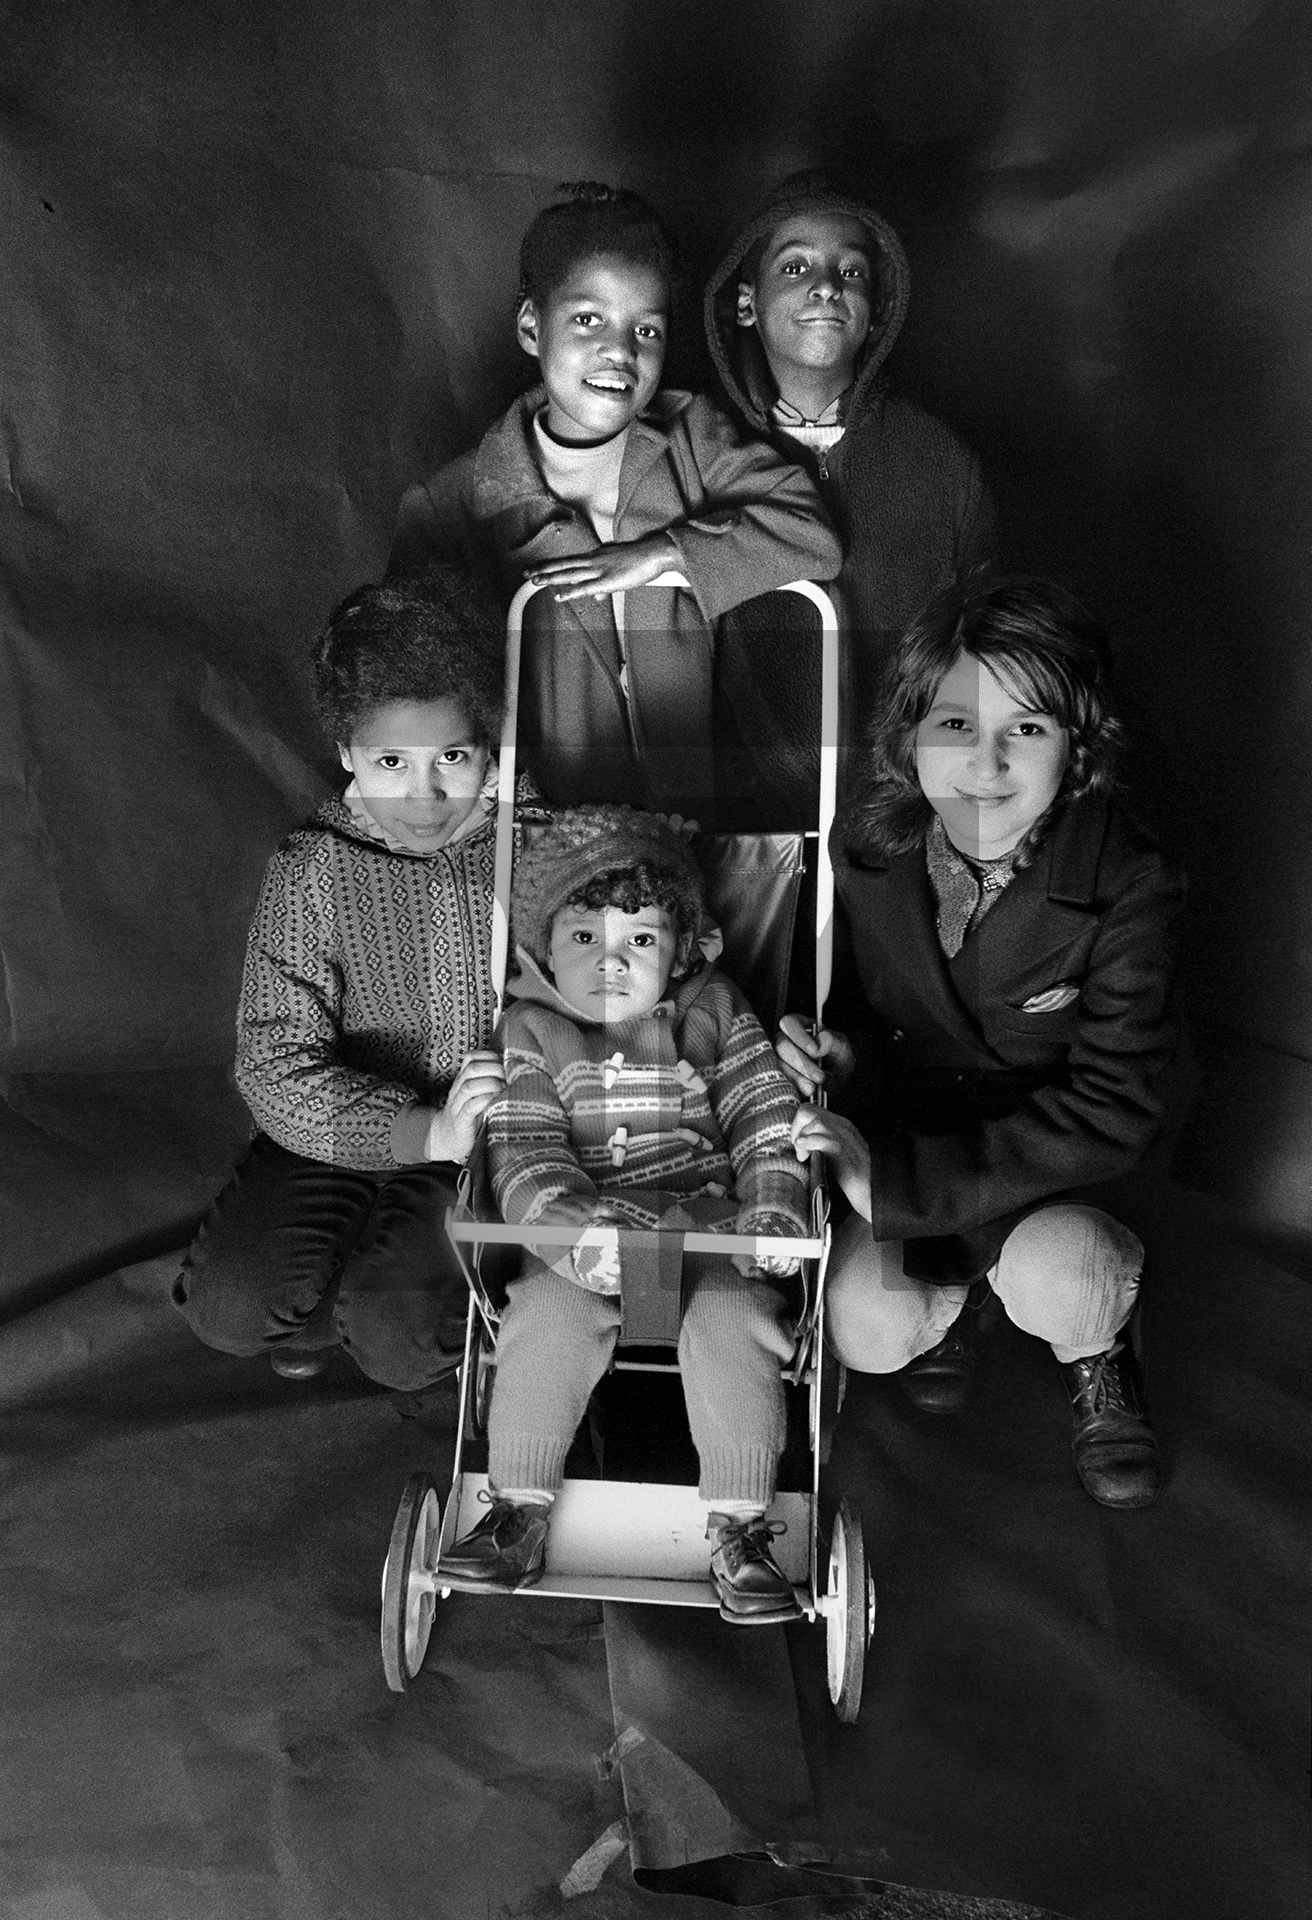 Antoinette Robotham (later Anjee McPherson) and Neville Robotham (later Neville Davis), standing. Debra Caines, crouching left, her sister Tricia in pushchair, Crouching right Wanda Bendix. Group portrait from The Shop on Greame Street, Moss Side, Manchester. February-April 1972 by Daniel Meadows